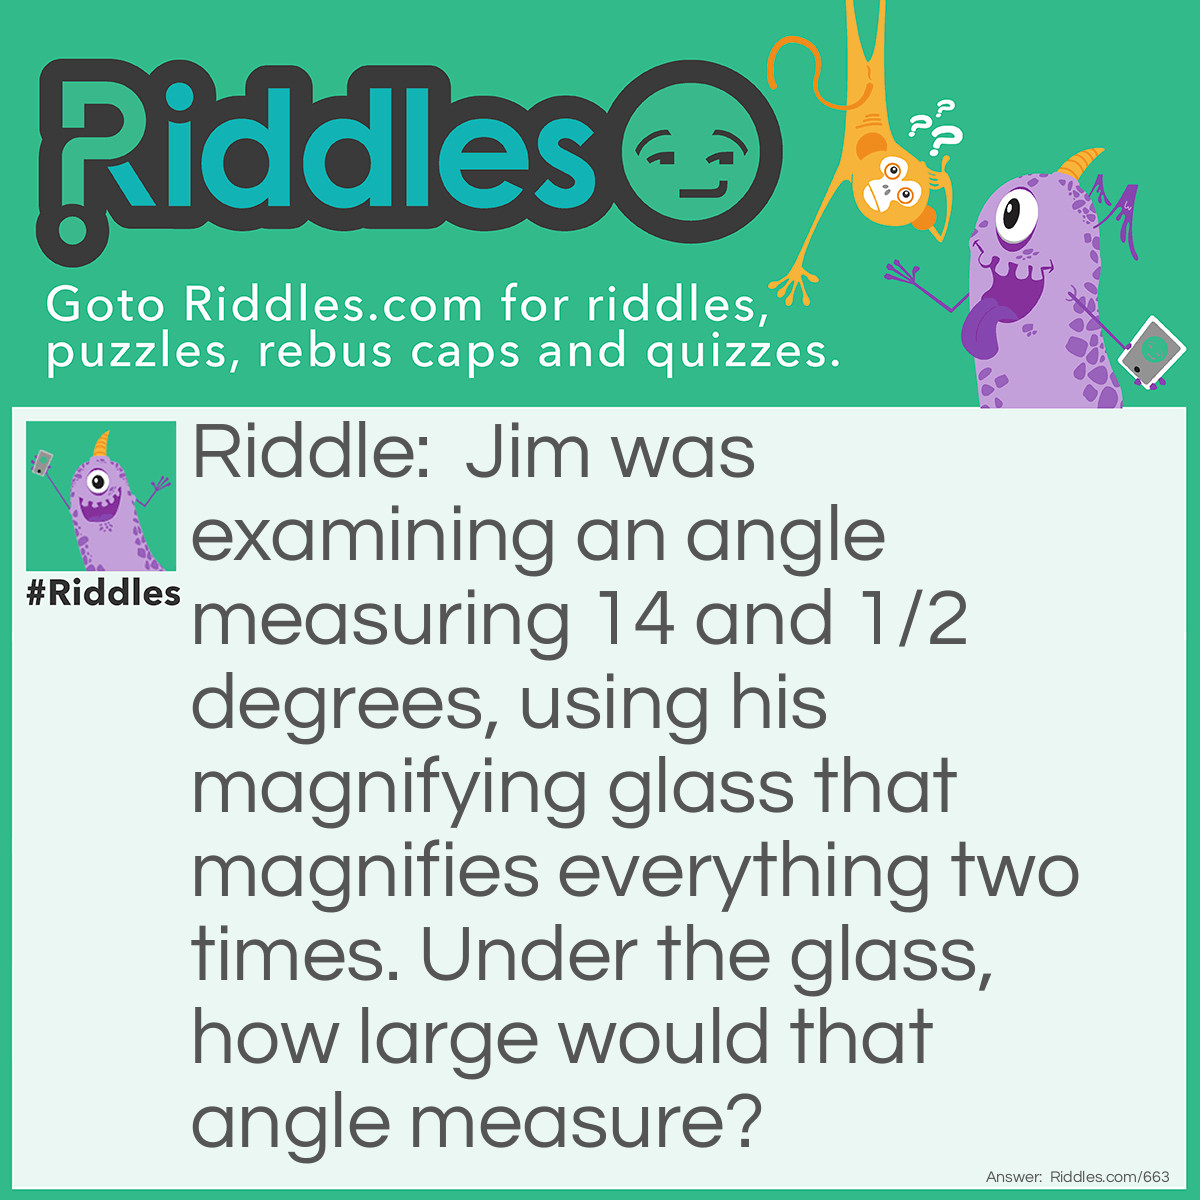 Riddle: Jim was examining an angle measuring 14 and 1/2 degrees, using his magnifying glass that magnifies everything two times. Under the glass, how large would that angle measure? Answer: 14 and 1/2 degrees. Explanation, angles remain constant when magnified. A square has 4-90 degree corners, if you zoom in (magnify) a square, it's still a square.